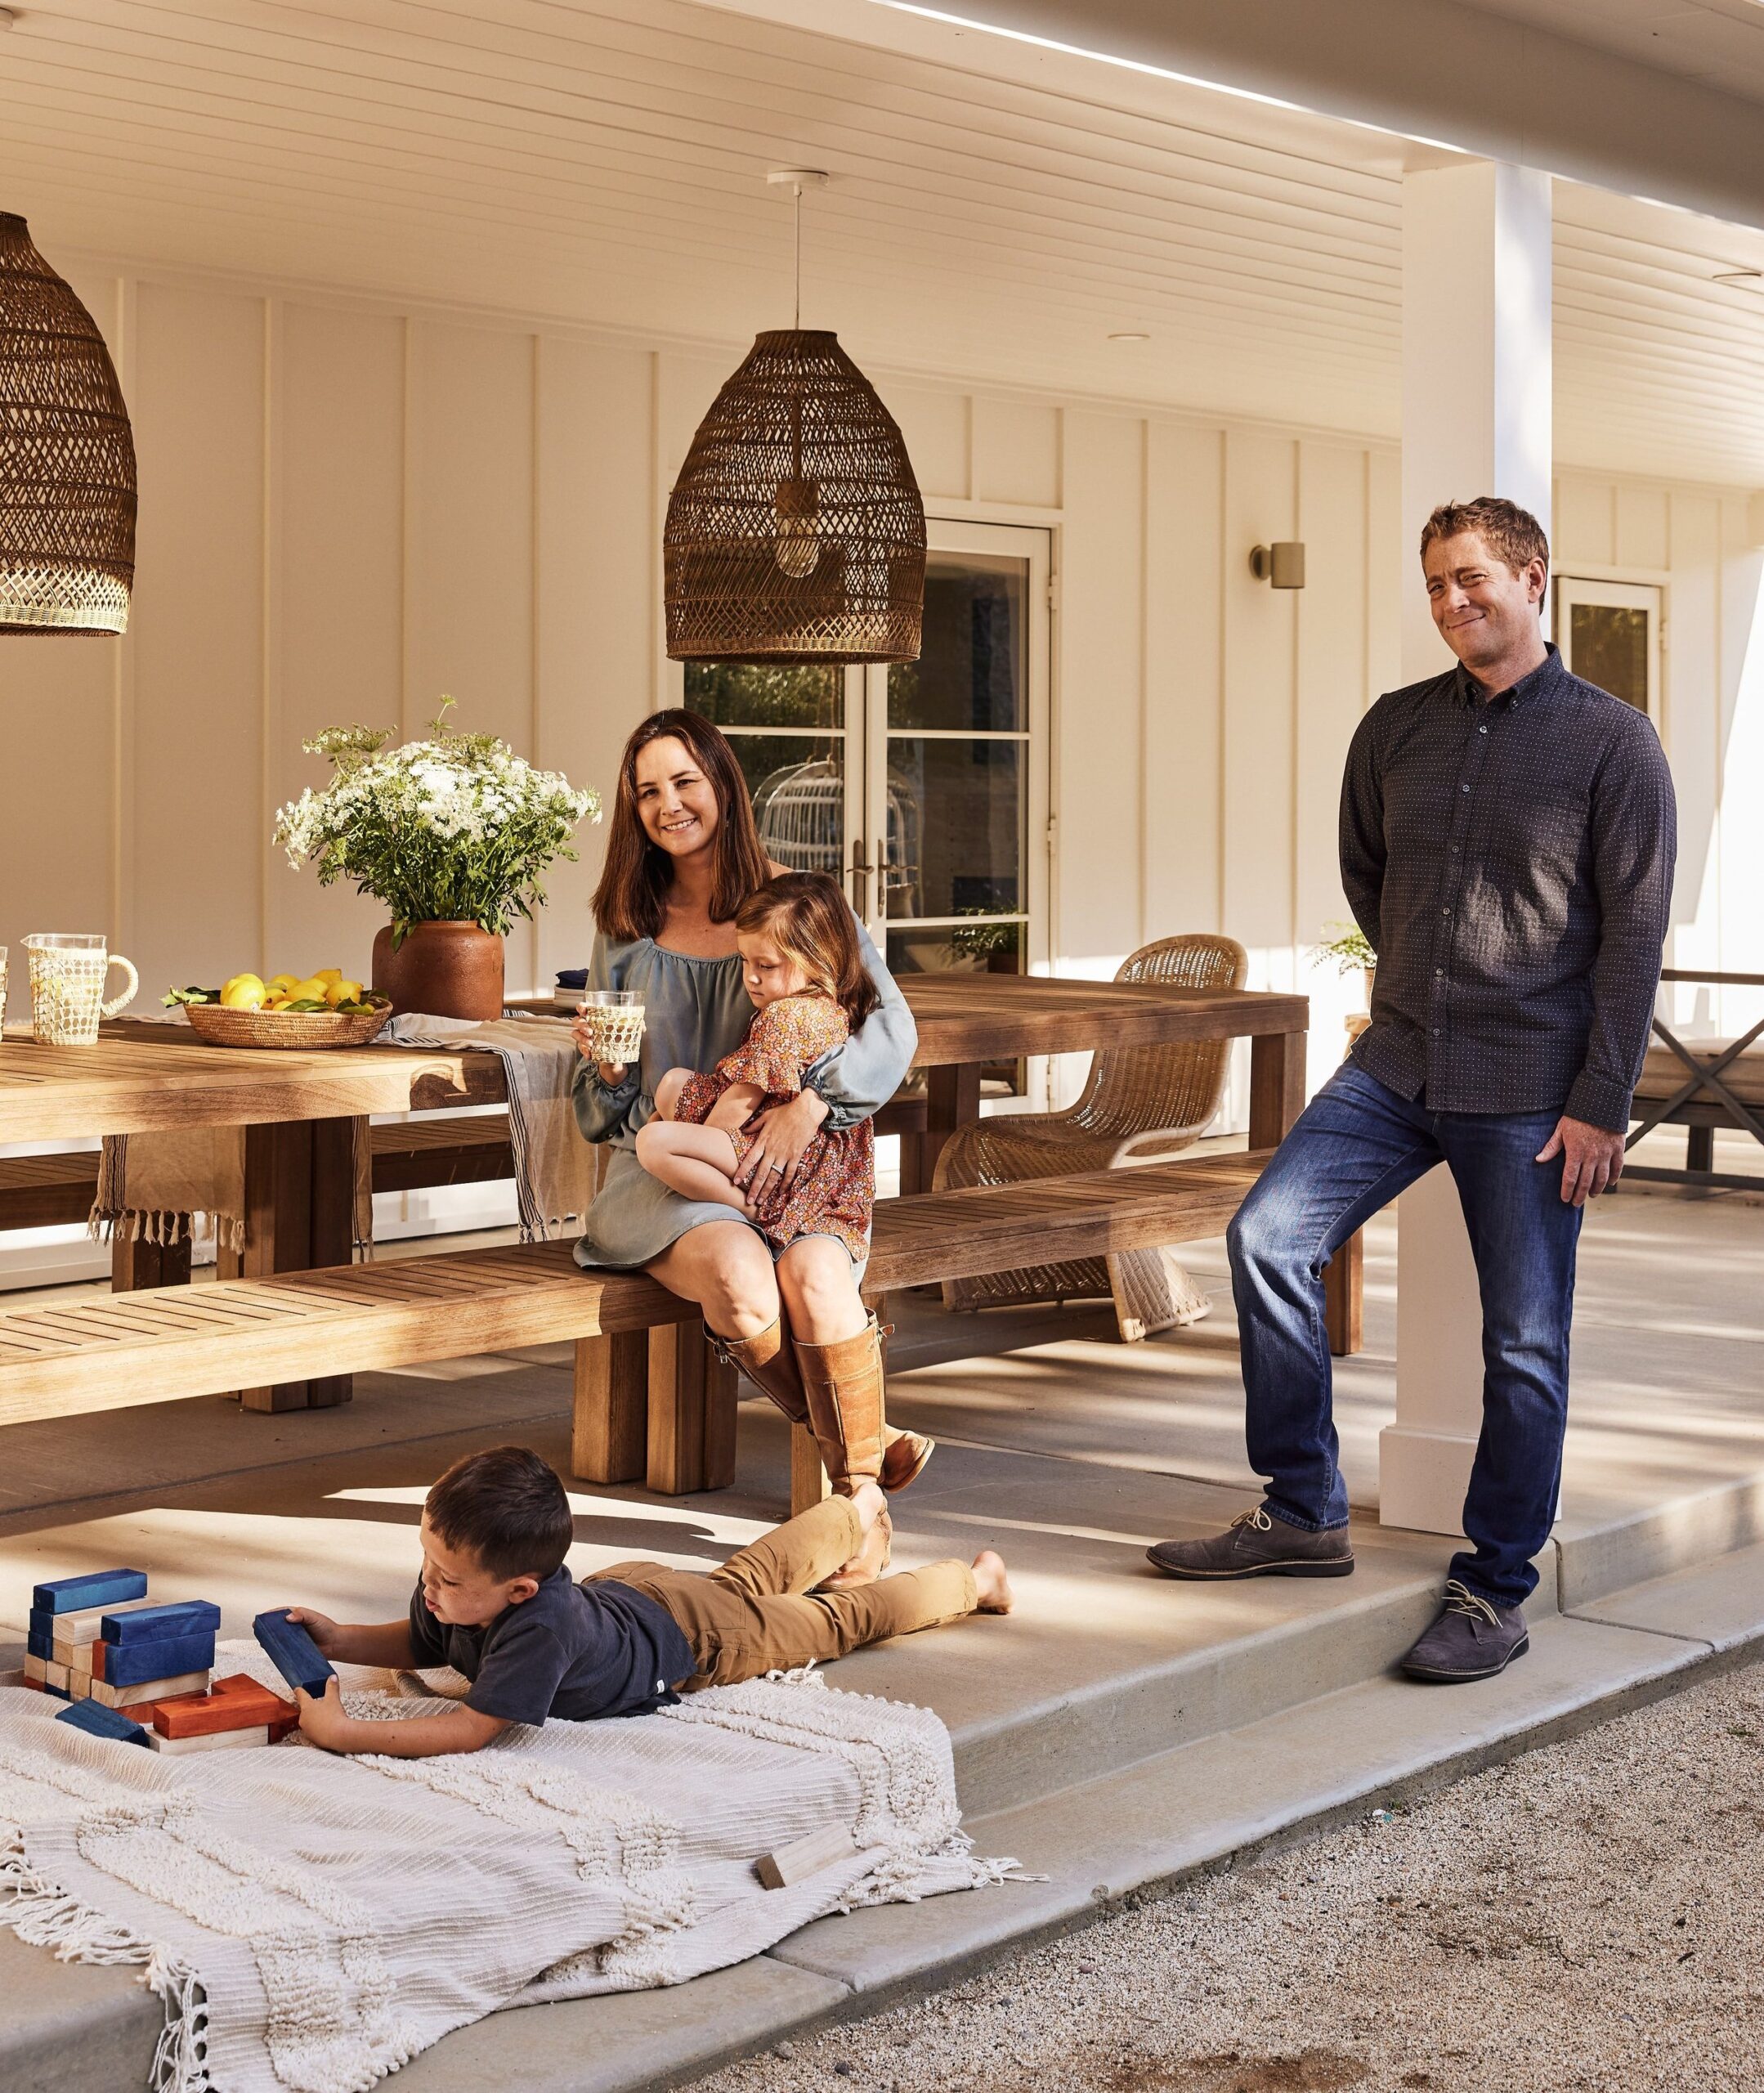 A family of four in a front yard with outdoor dining furniture and outdoor hanging lights